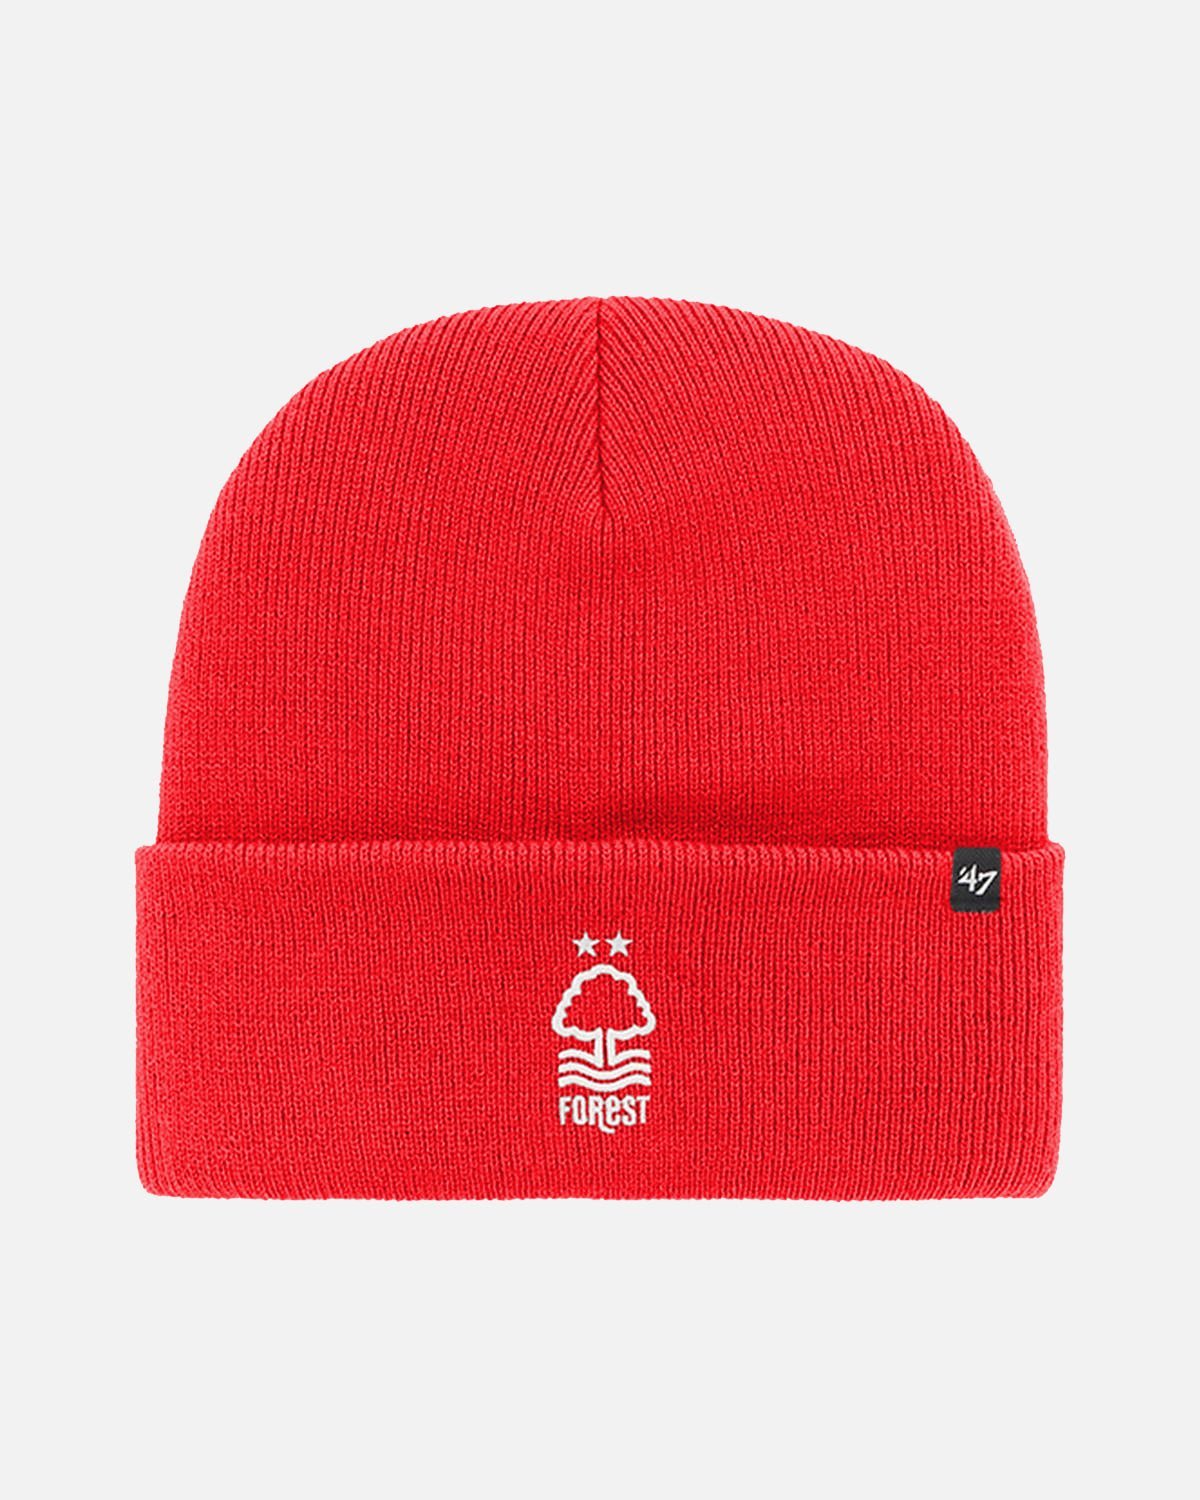 NFFC Red Haymaker '47 Cuff Knit - Junior - Nottingham Forest FC